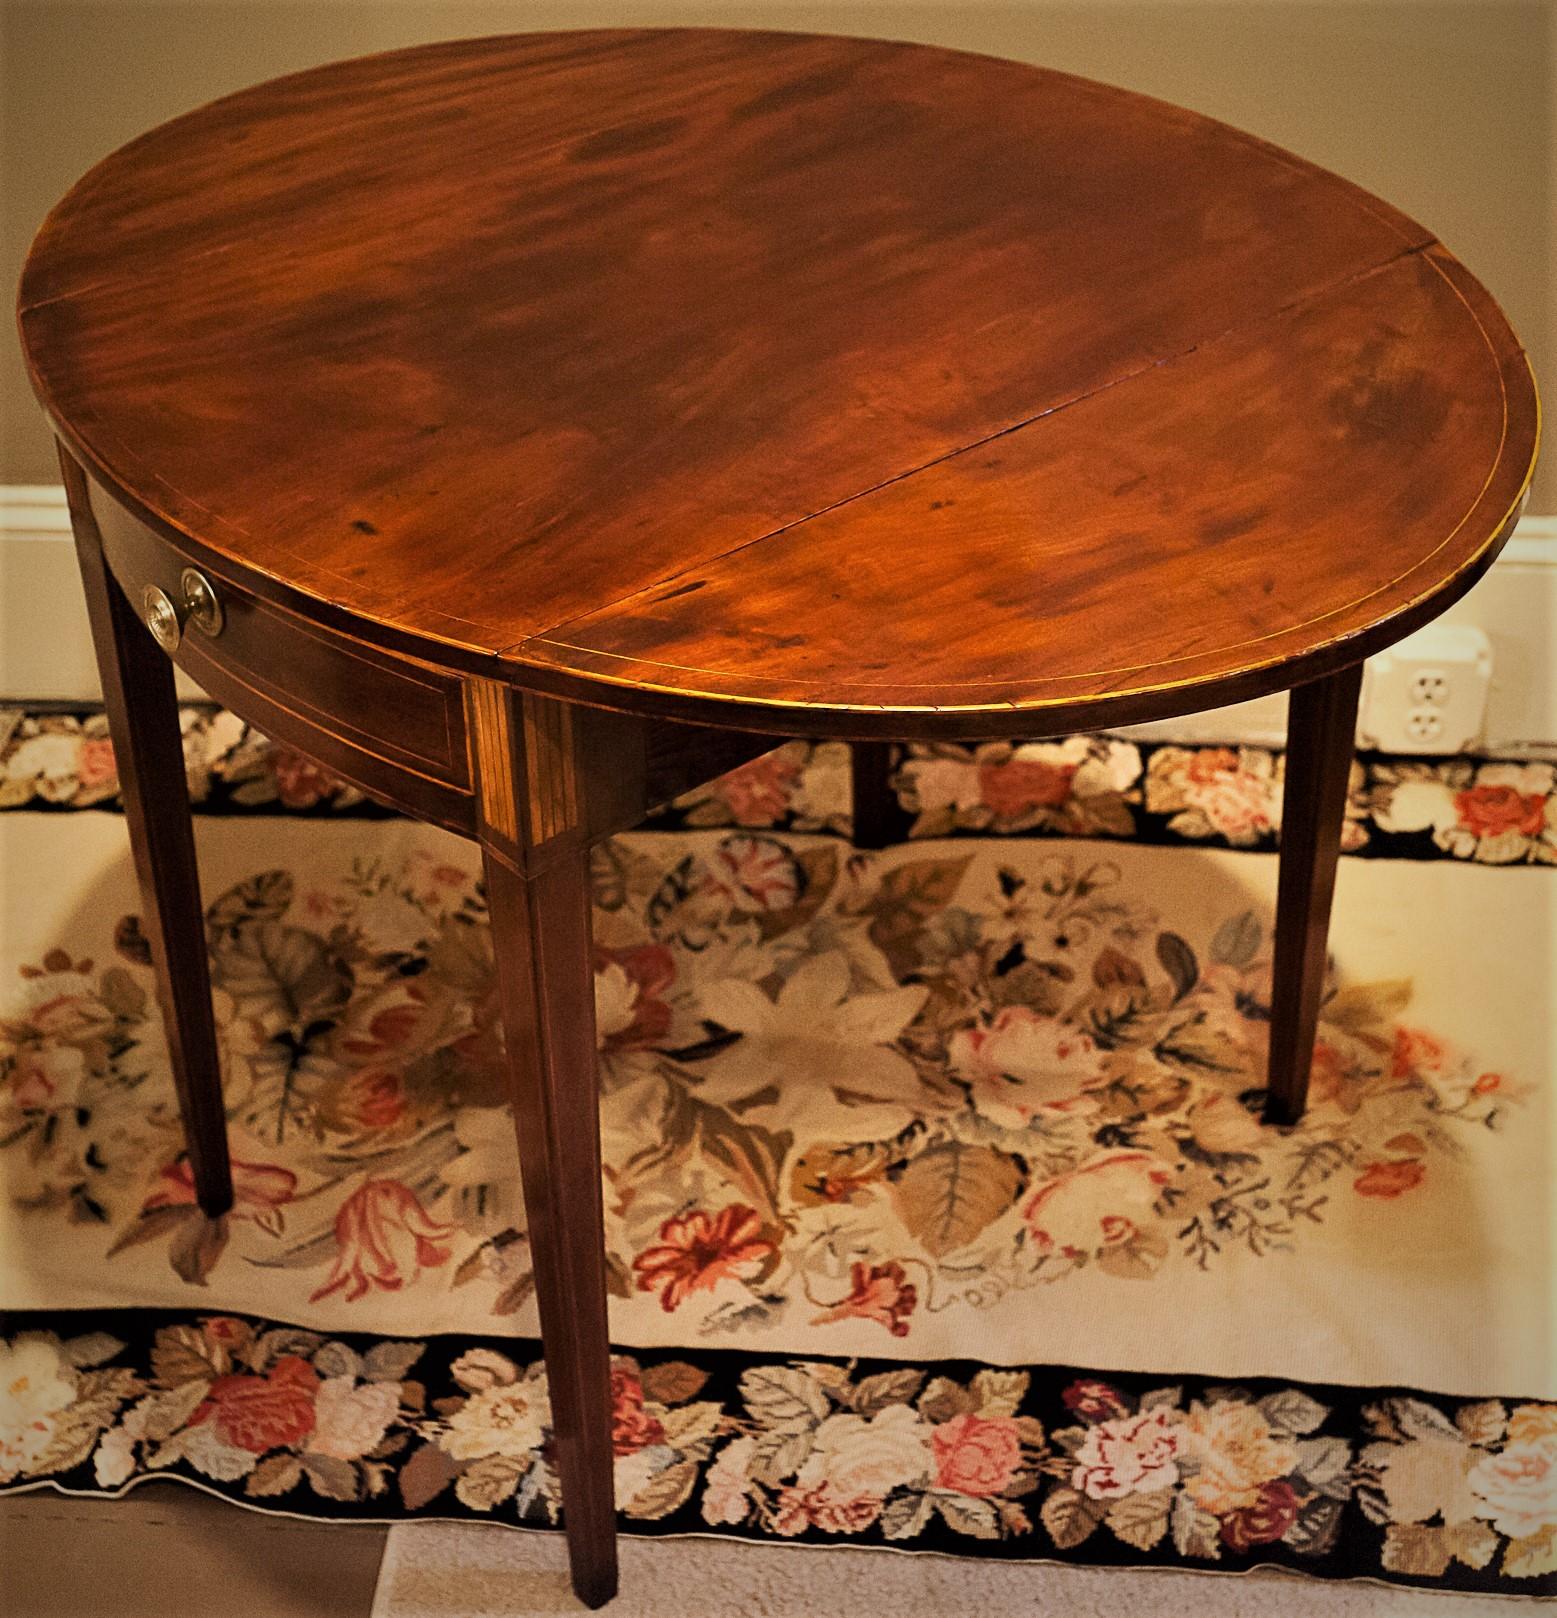 Federal Satinwood Inlaid Mahogany Oval Pembroke Table, New York, circa 1800 In Good Condition For Sale In Alexandria, VA